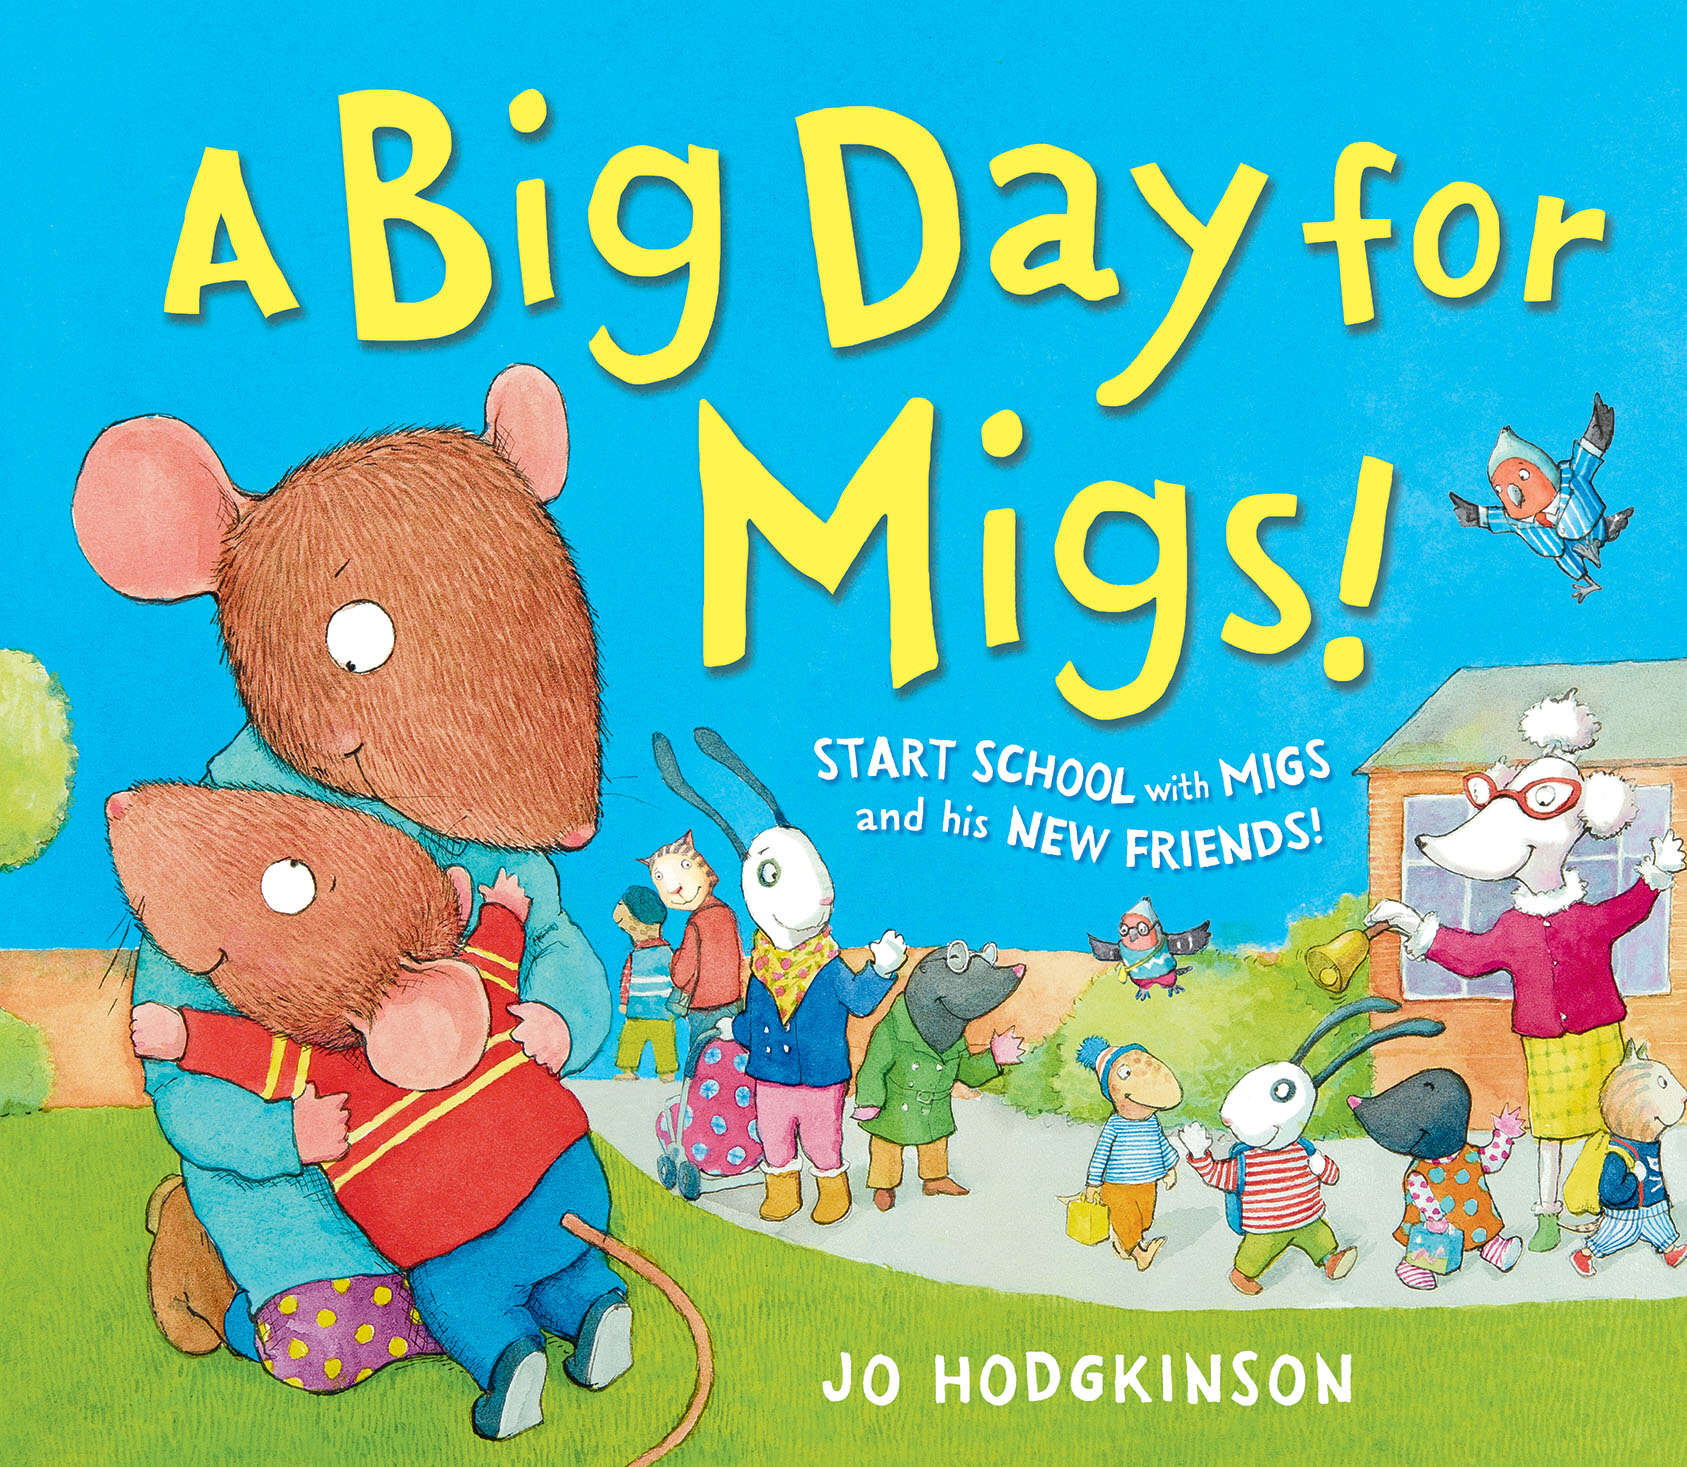 A Big Day for Migs!